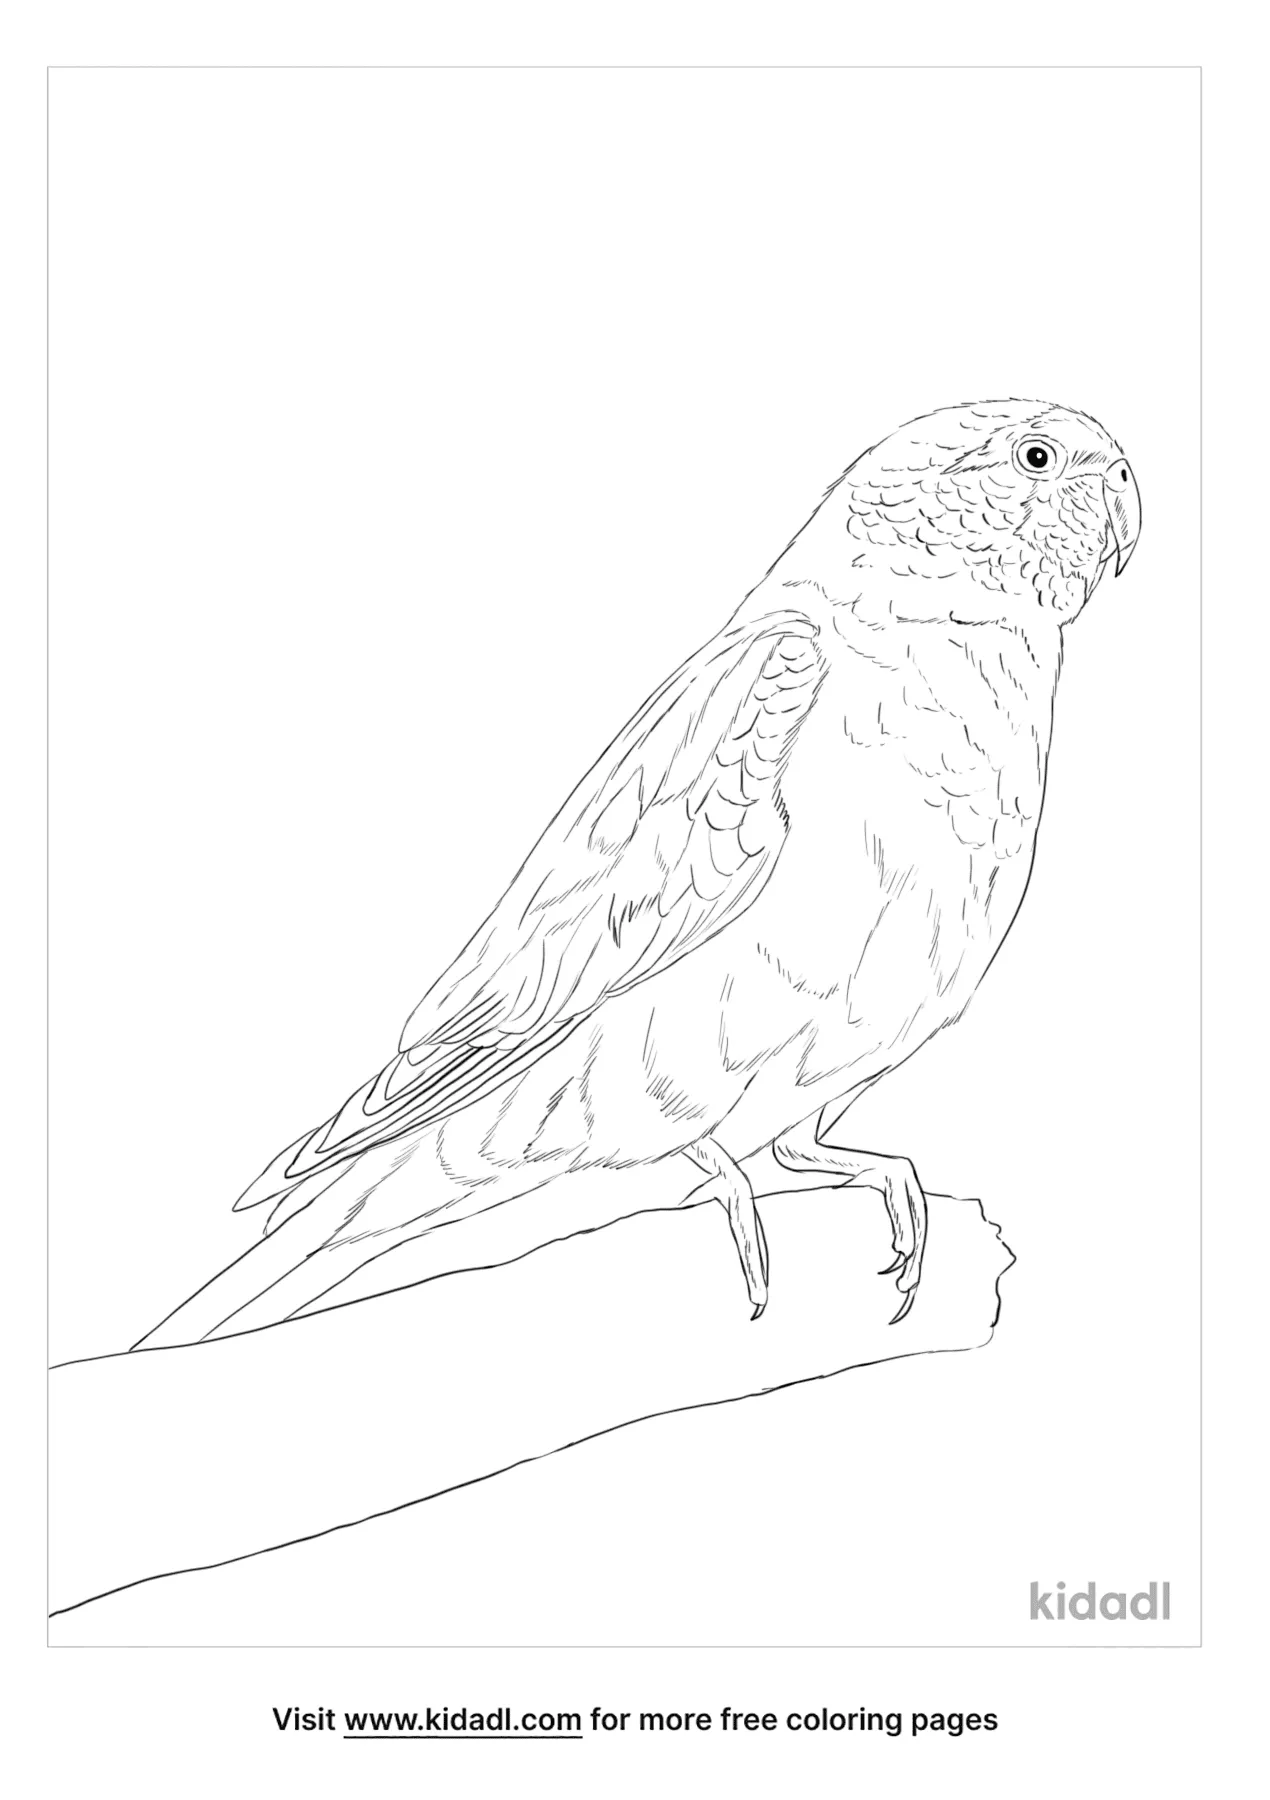 Turquoise Parrot Coloring Page